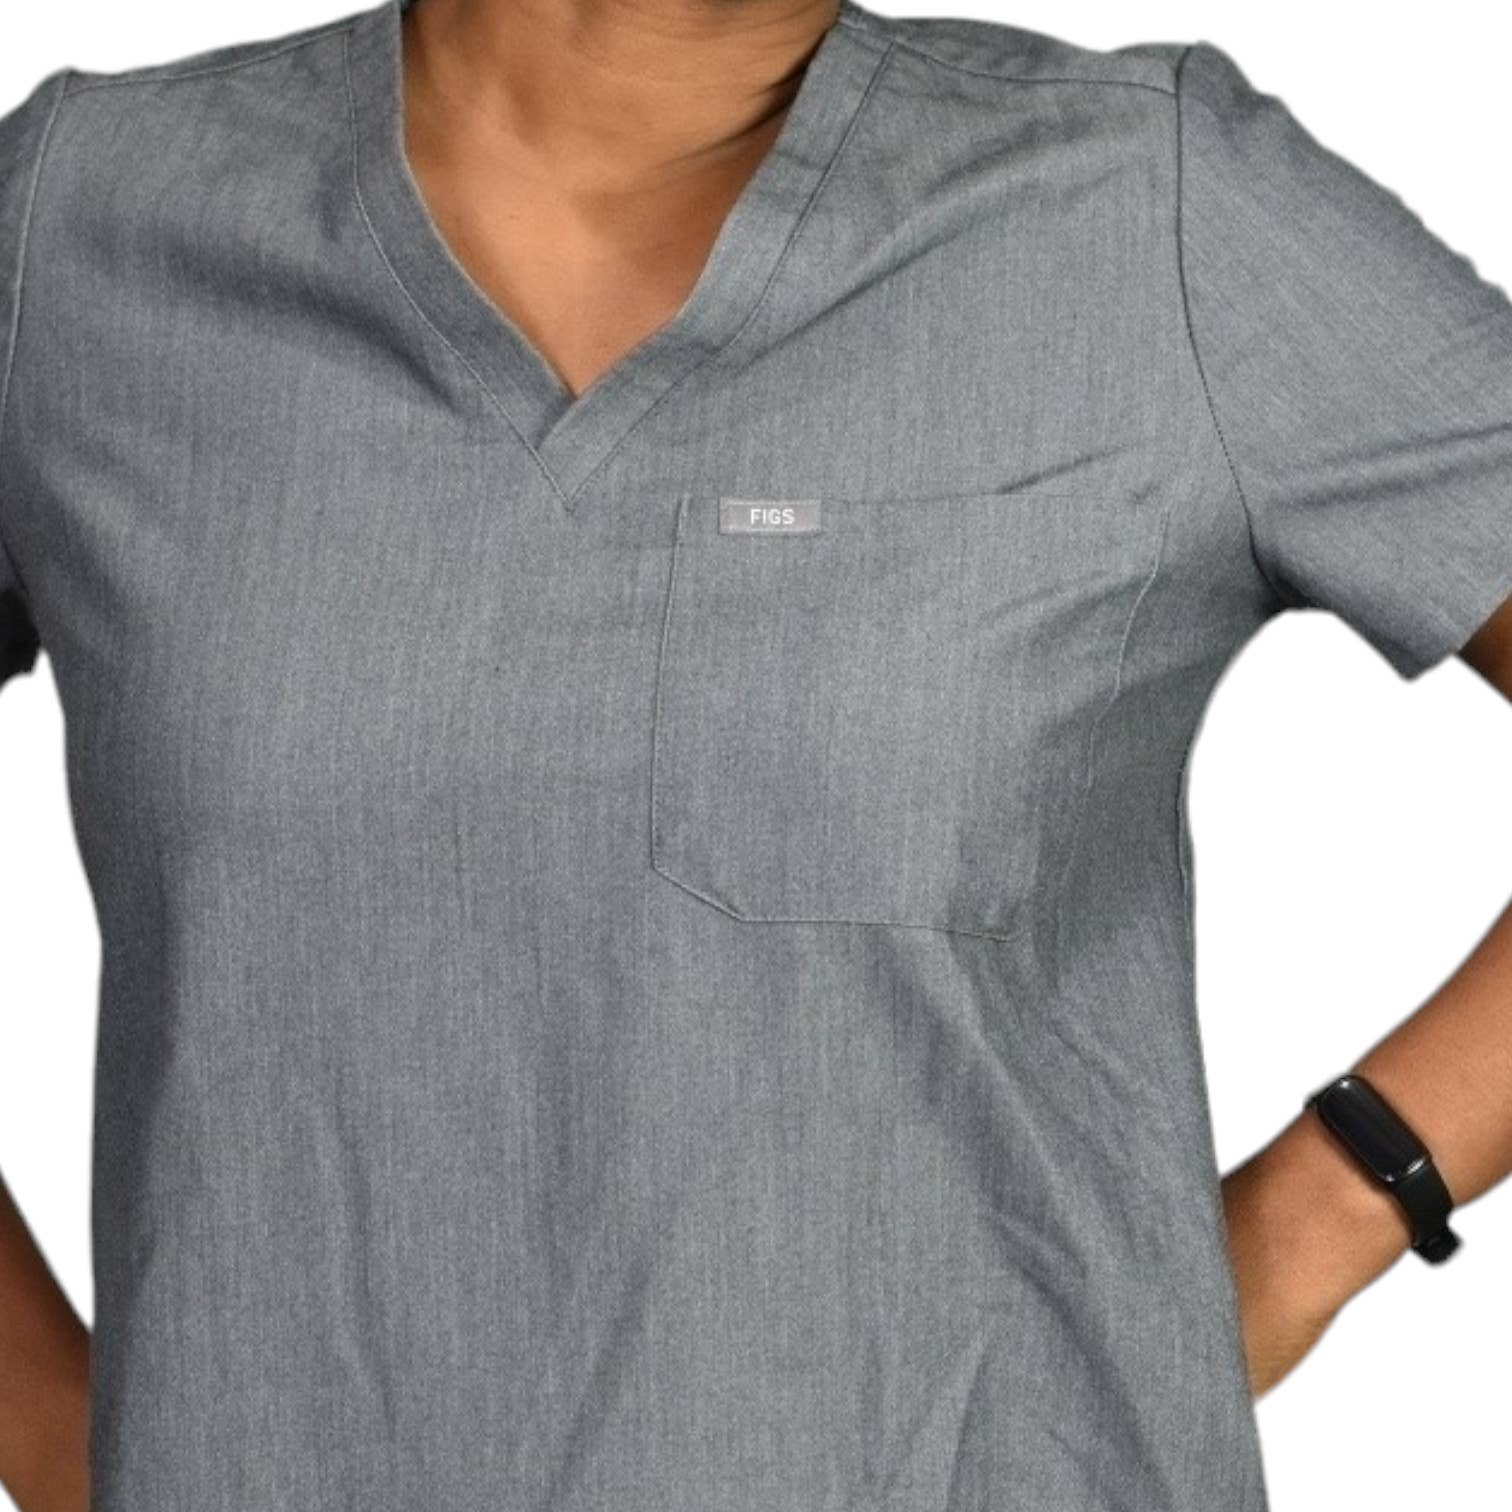 FIGS Catarina Scrubs Top Gray Technical Collection V-Neck Chest Pocket Size Small